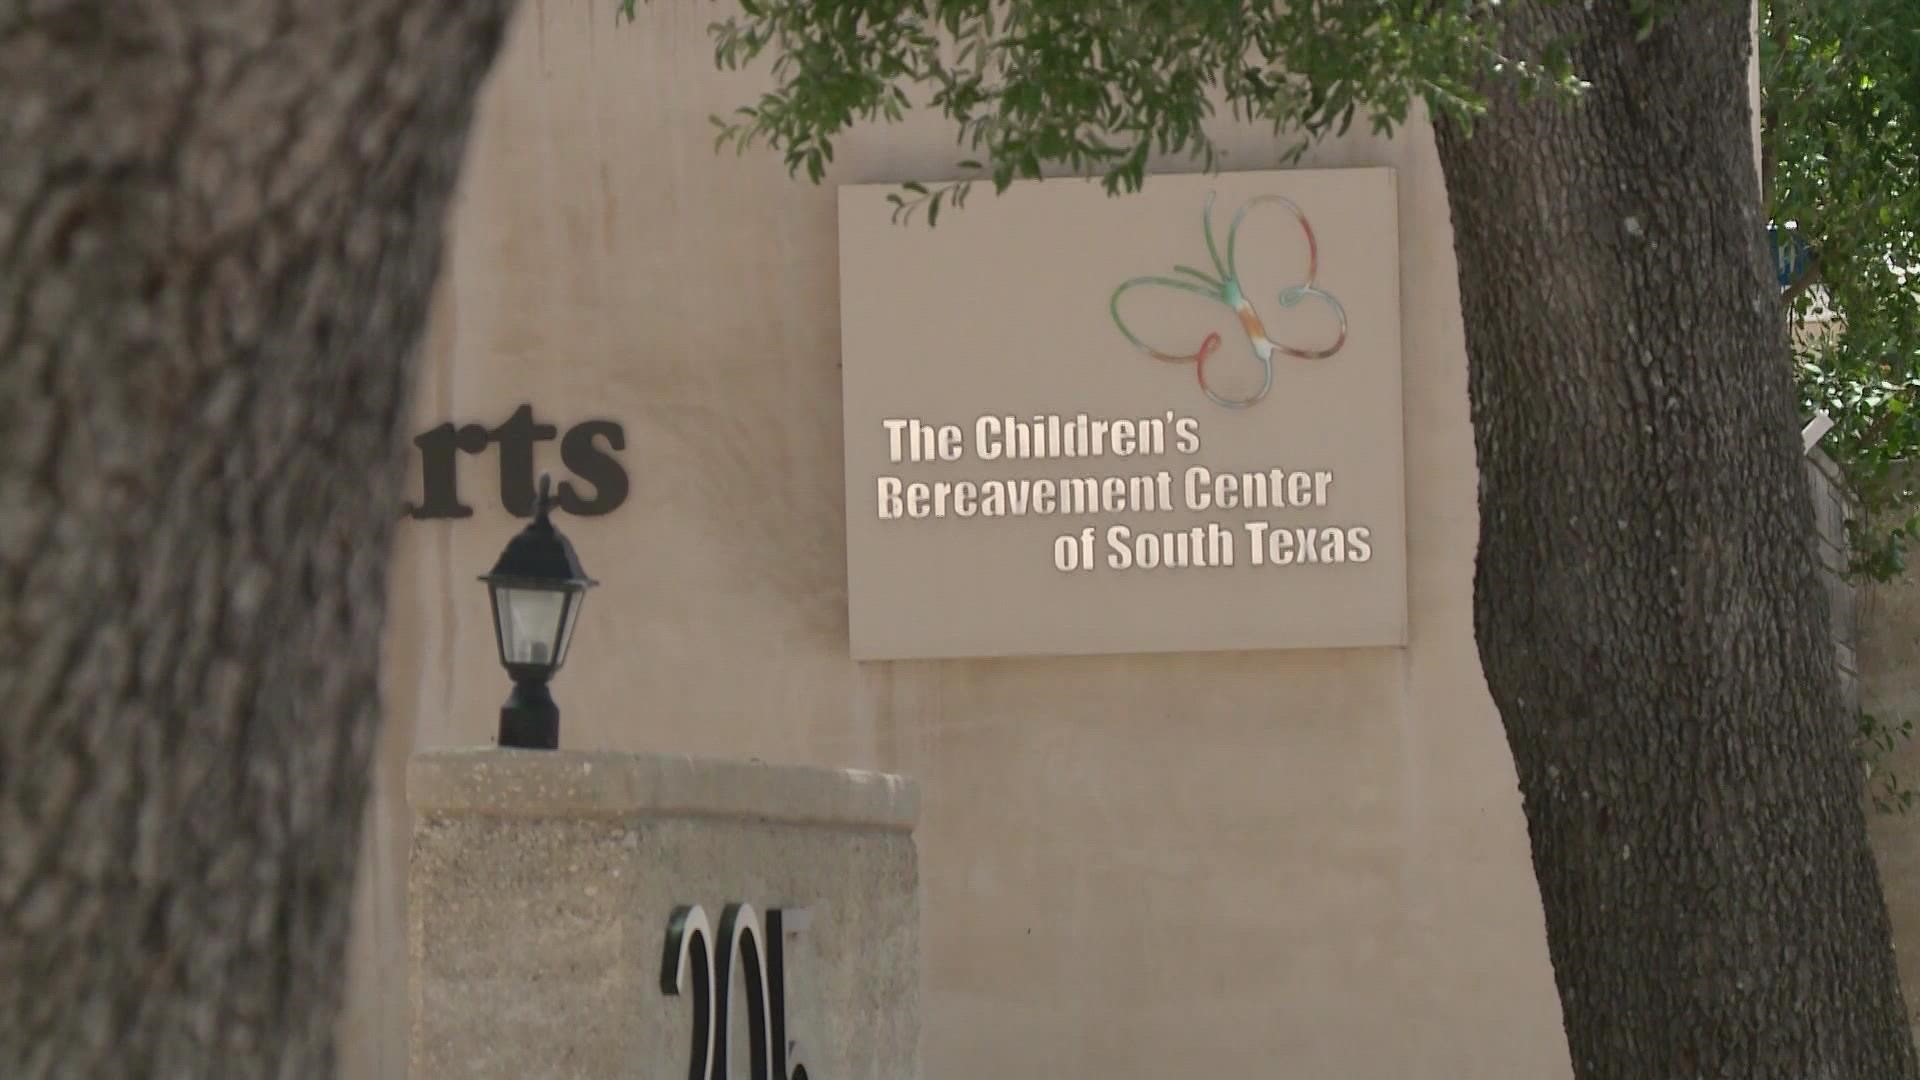 The Children's Bereavement Center of South Texas has spent the summer months training school staff on how to work with youth impacted by the Robb Elementary tragedy.